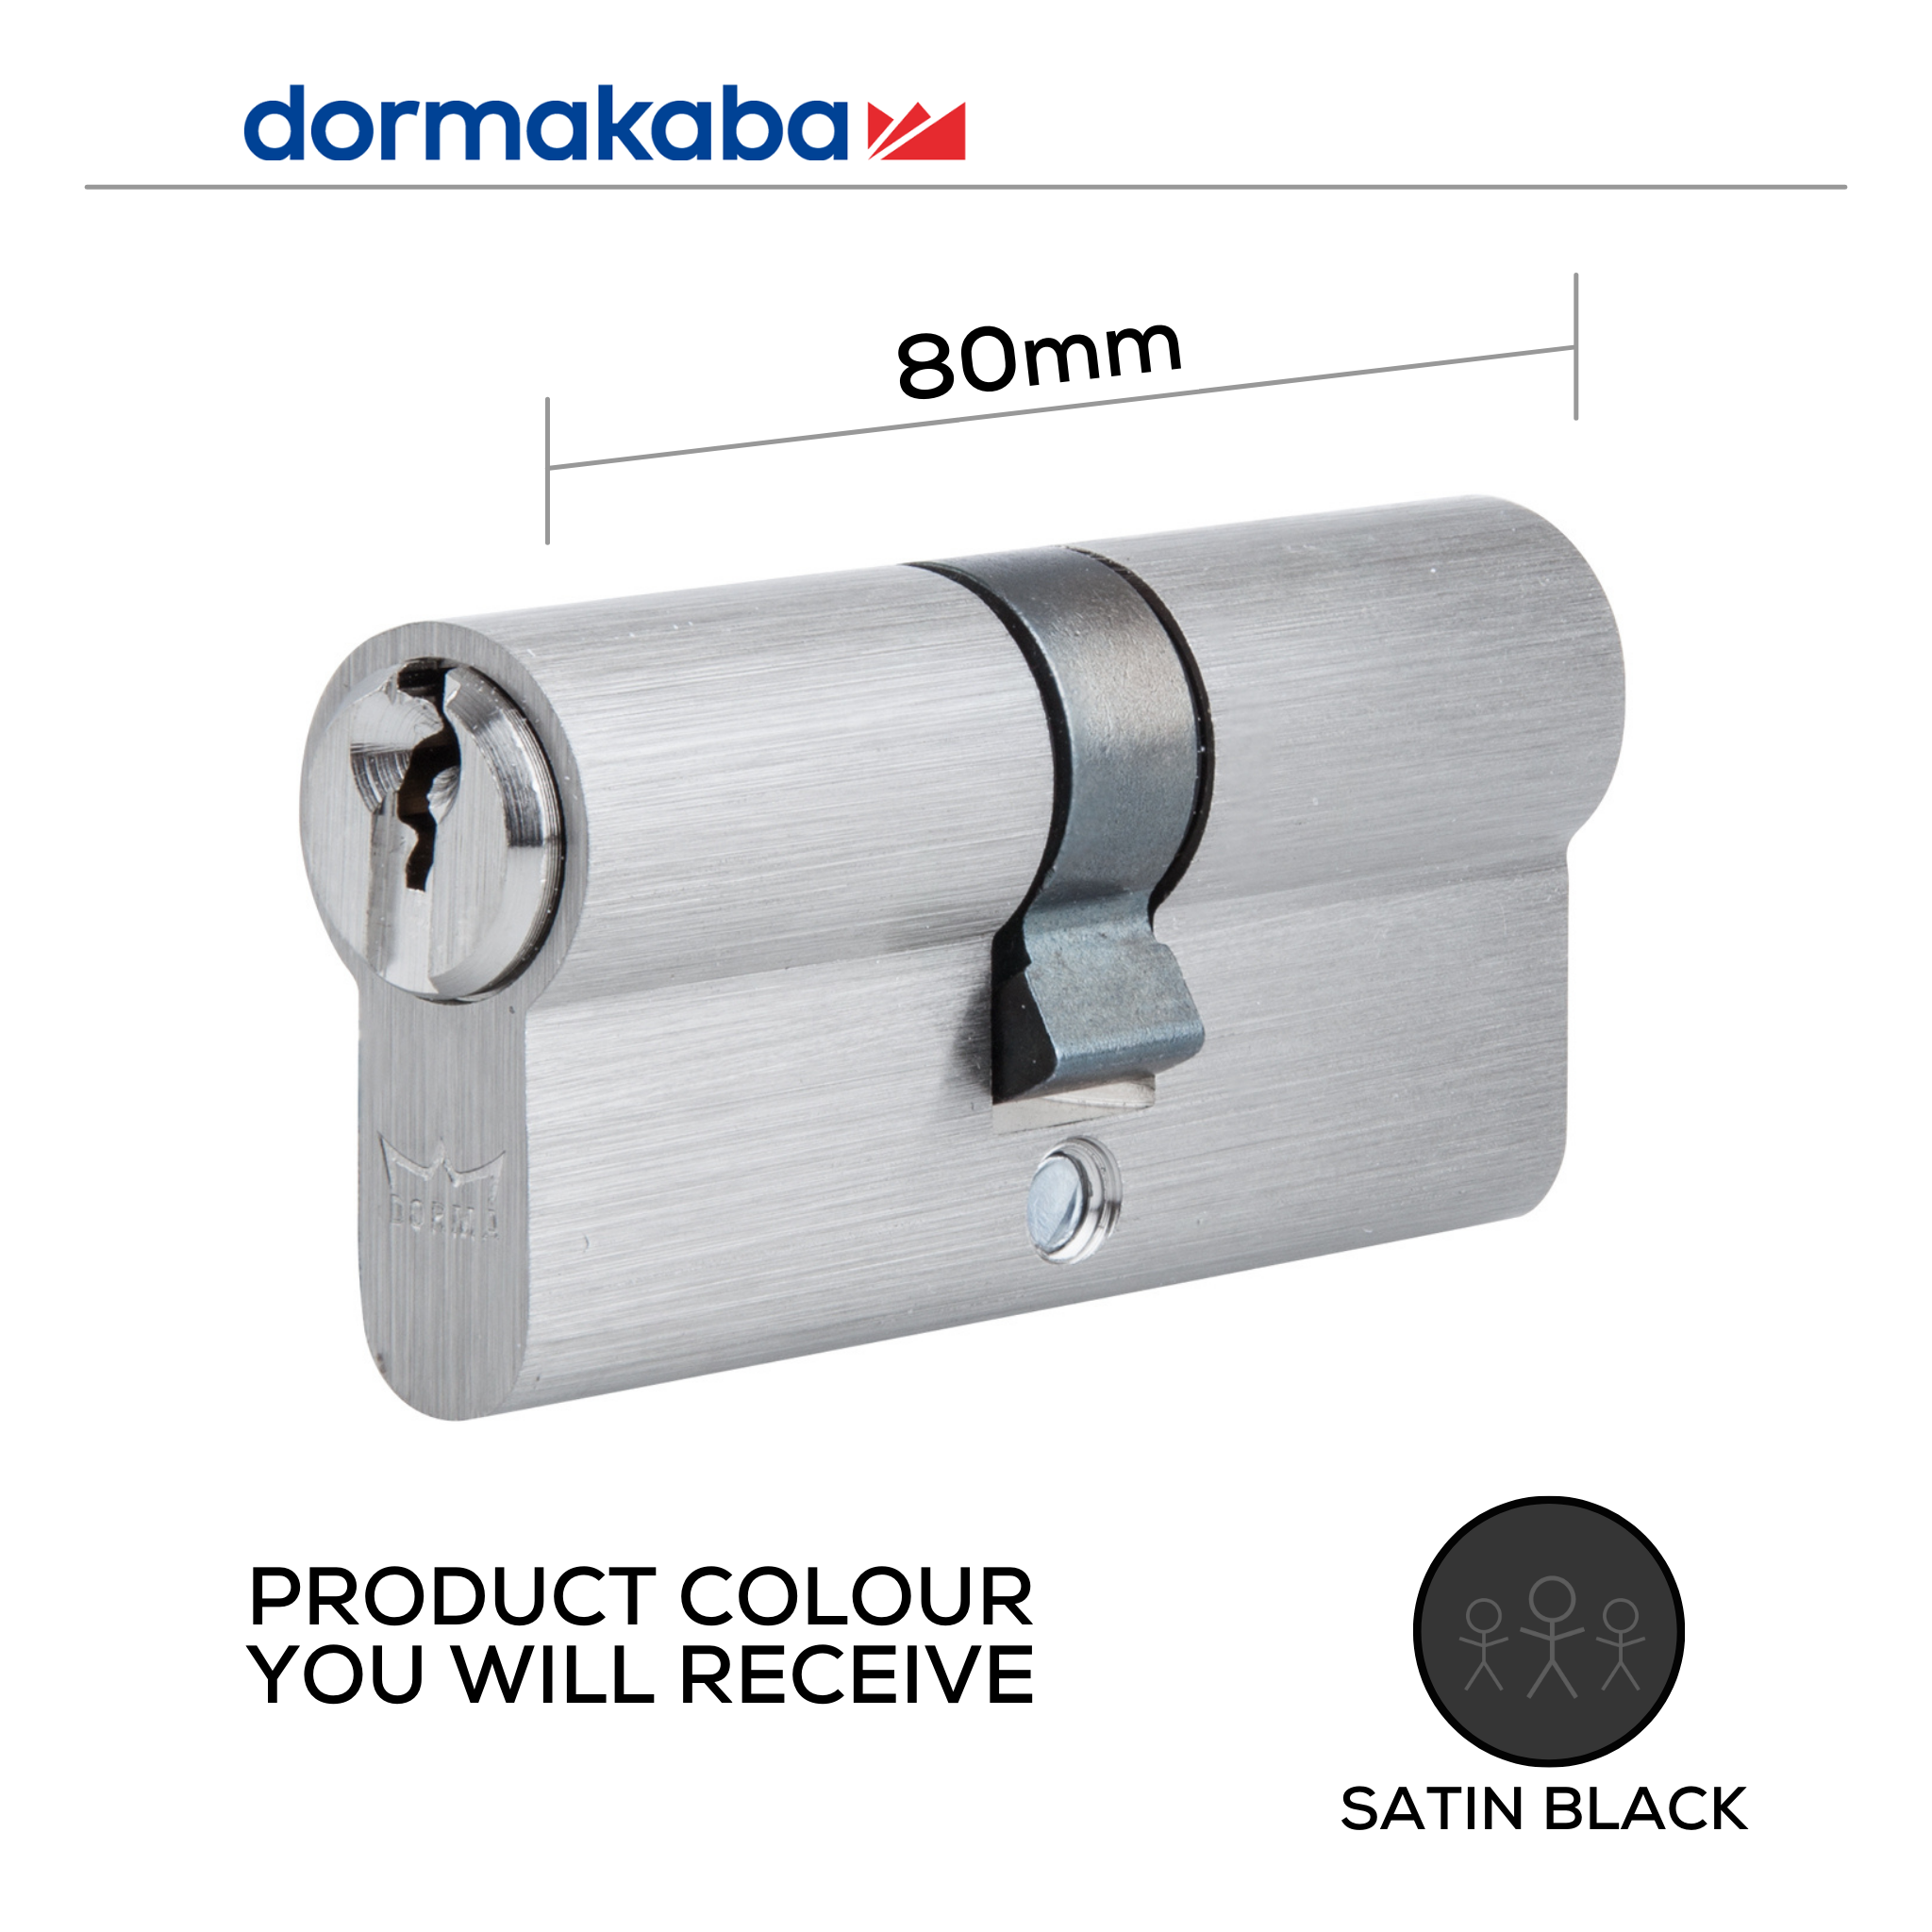 DDC208002 KD, 80mm (l), Double, Cylinder, Keyed Different, 5 Pin, Satin Black, DORMAKABA